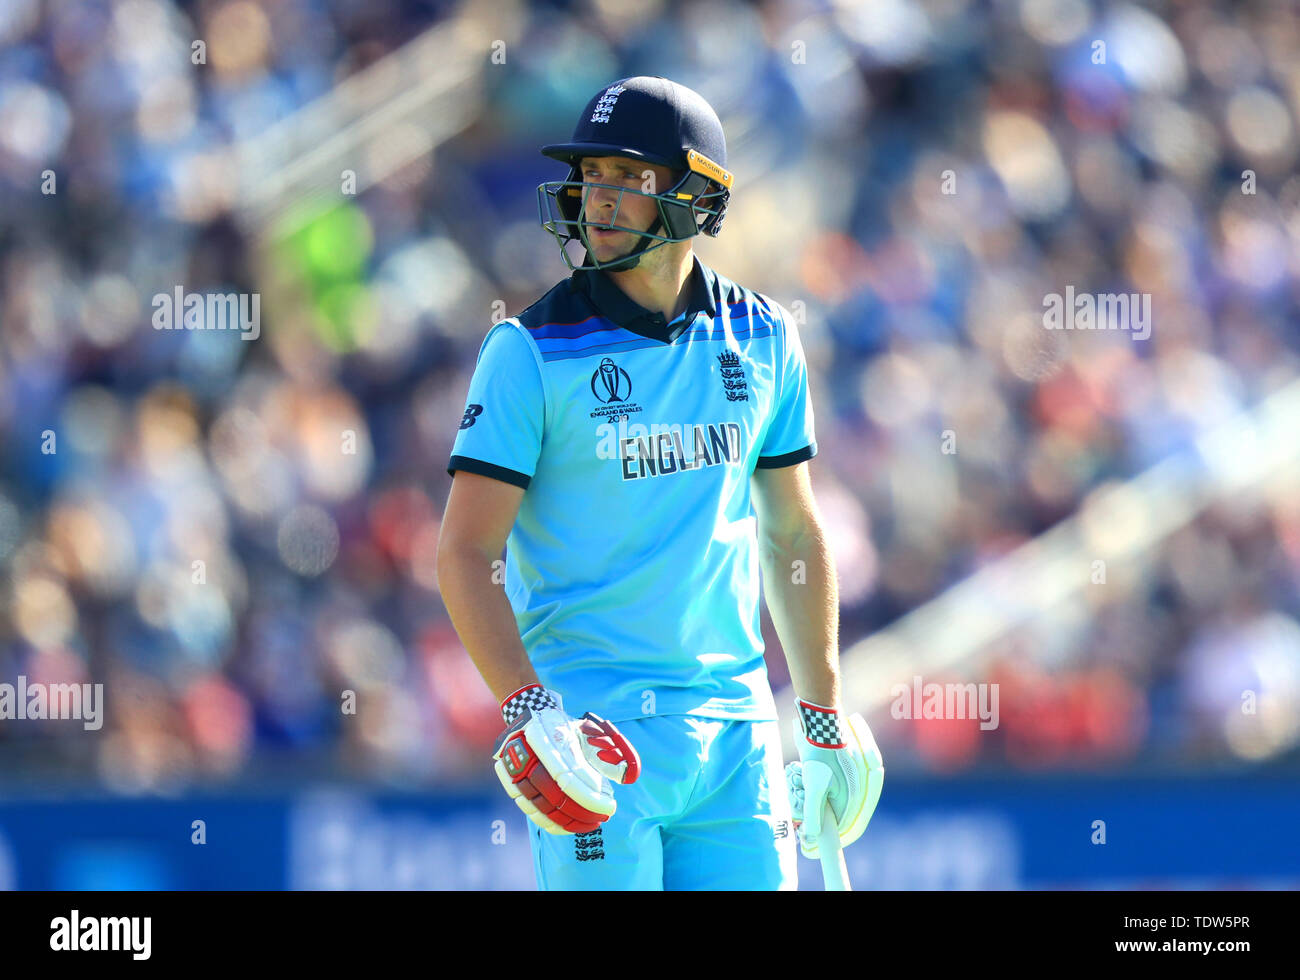 England's Chris Woakes after being dismissed during the ICC cricket World Cup group stage match at Headingley, Leeds. Stock Photo